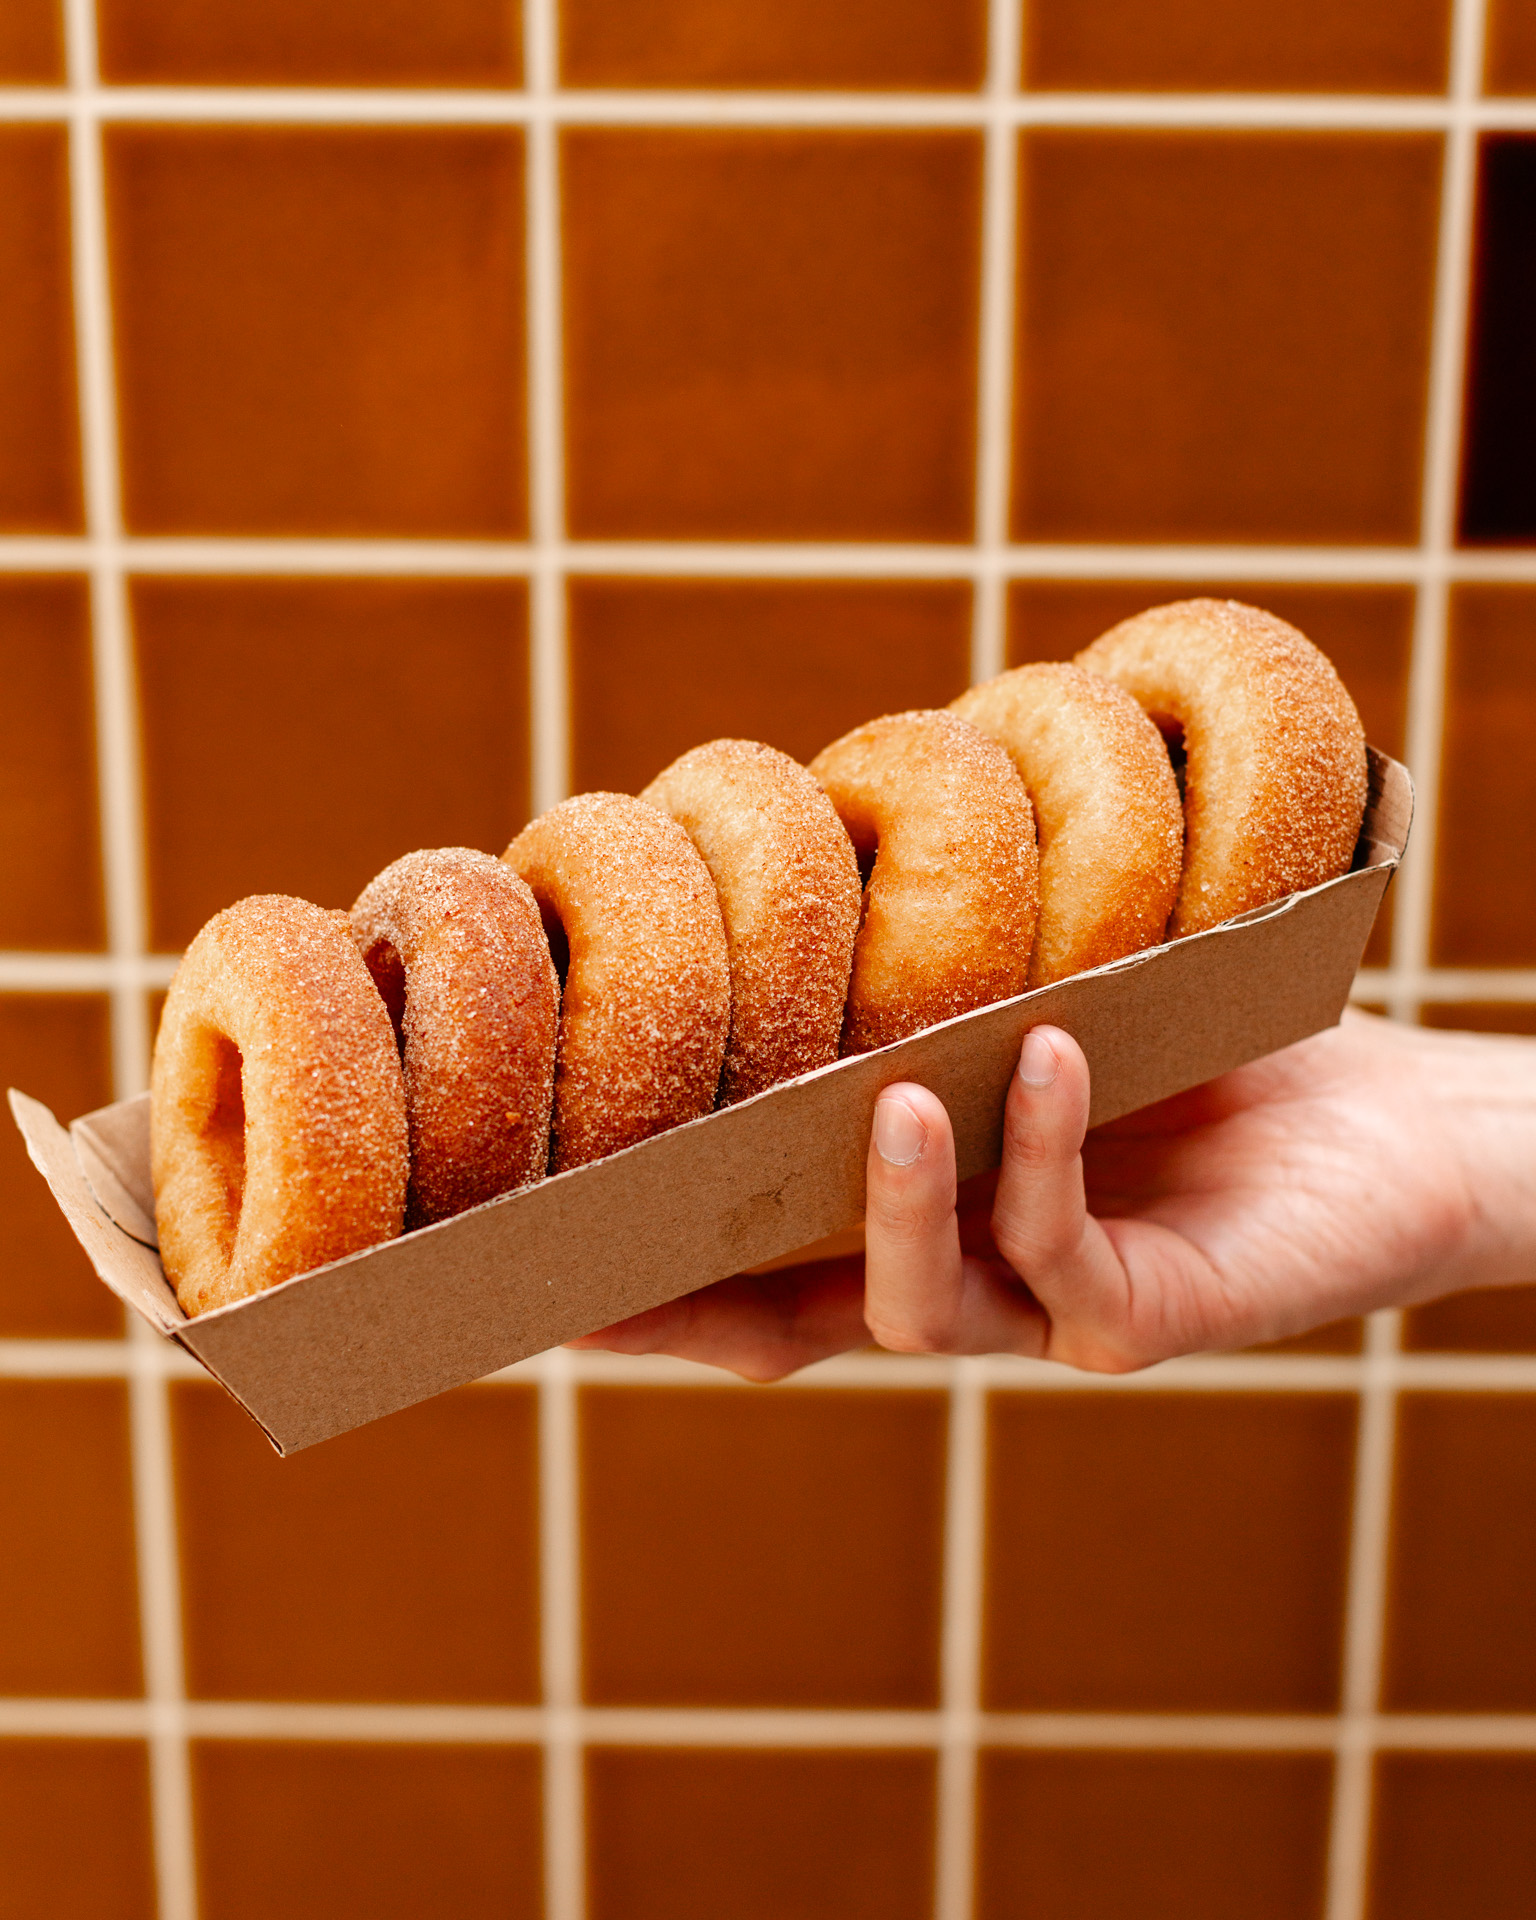 a hand holding a box of donuts